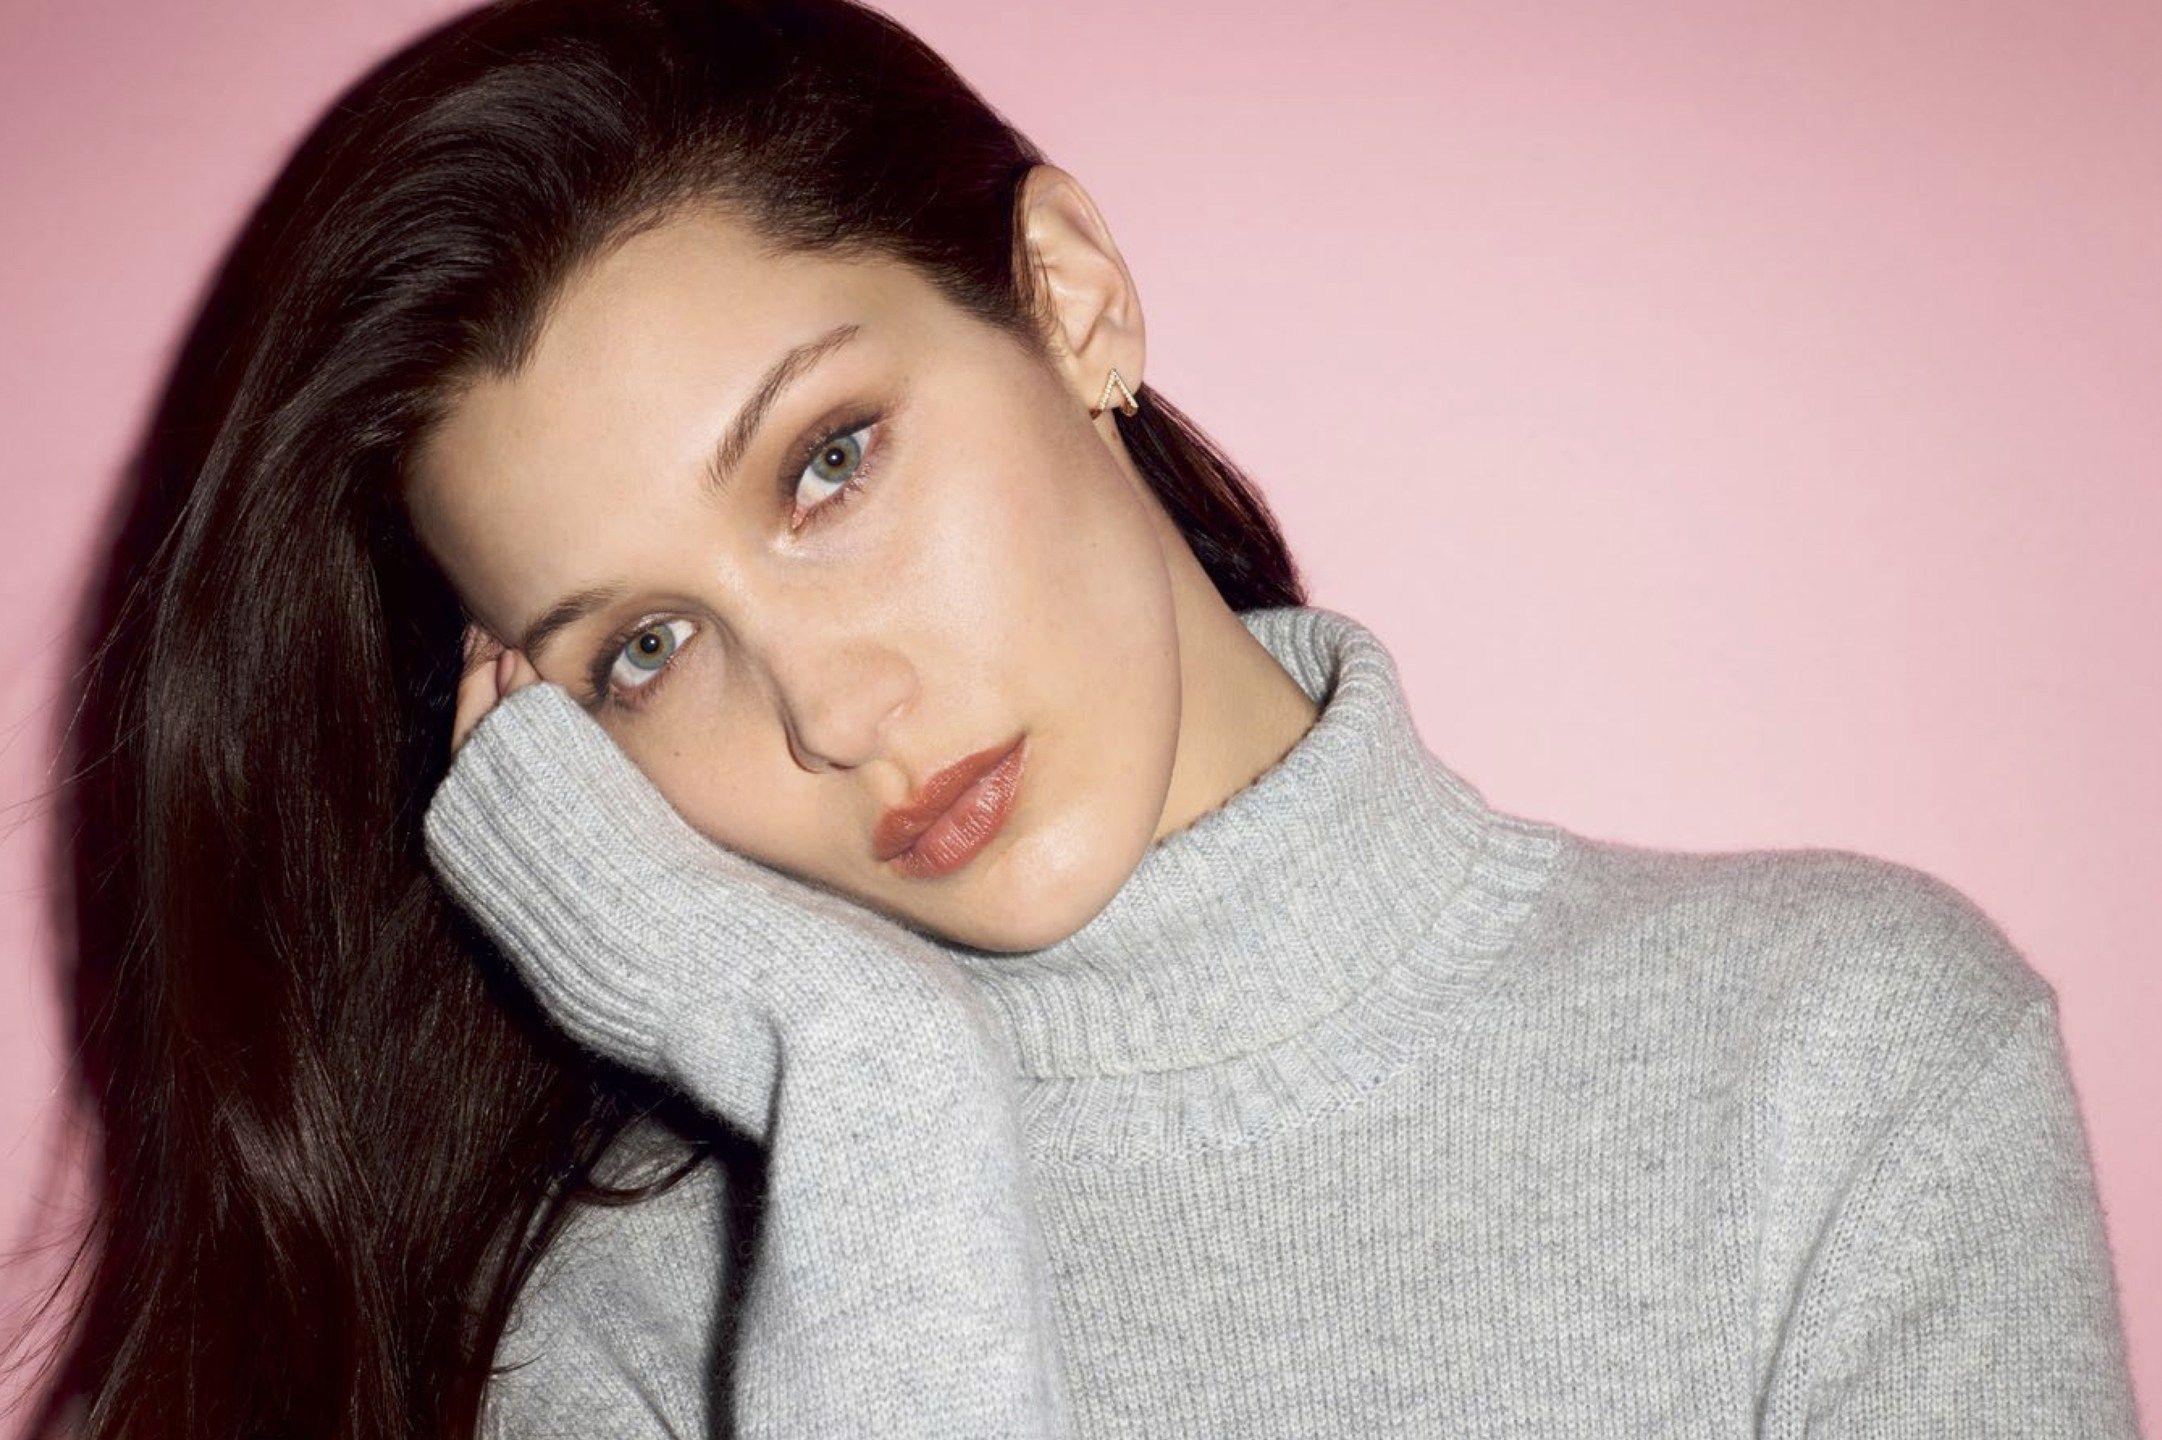 Bella Hadid Wallpaper Image Photo Picture Background